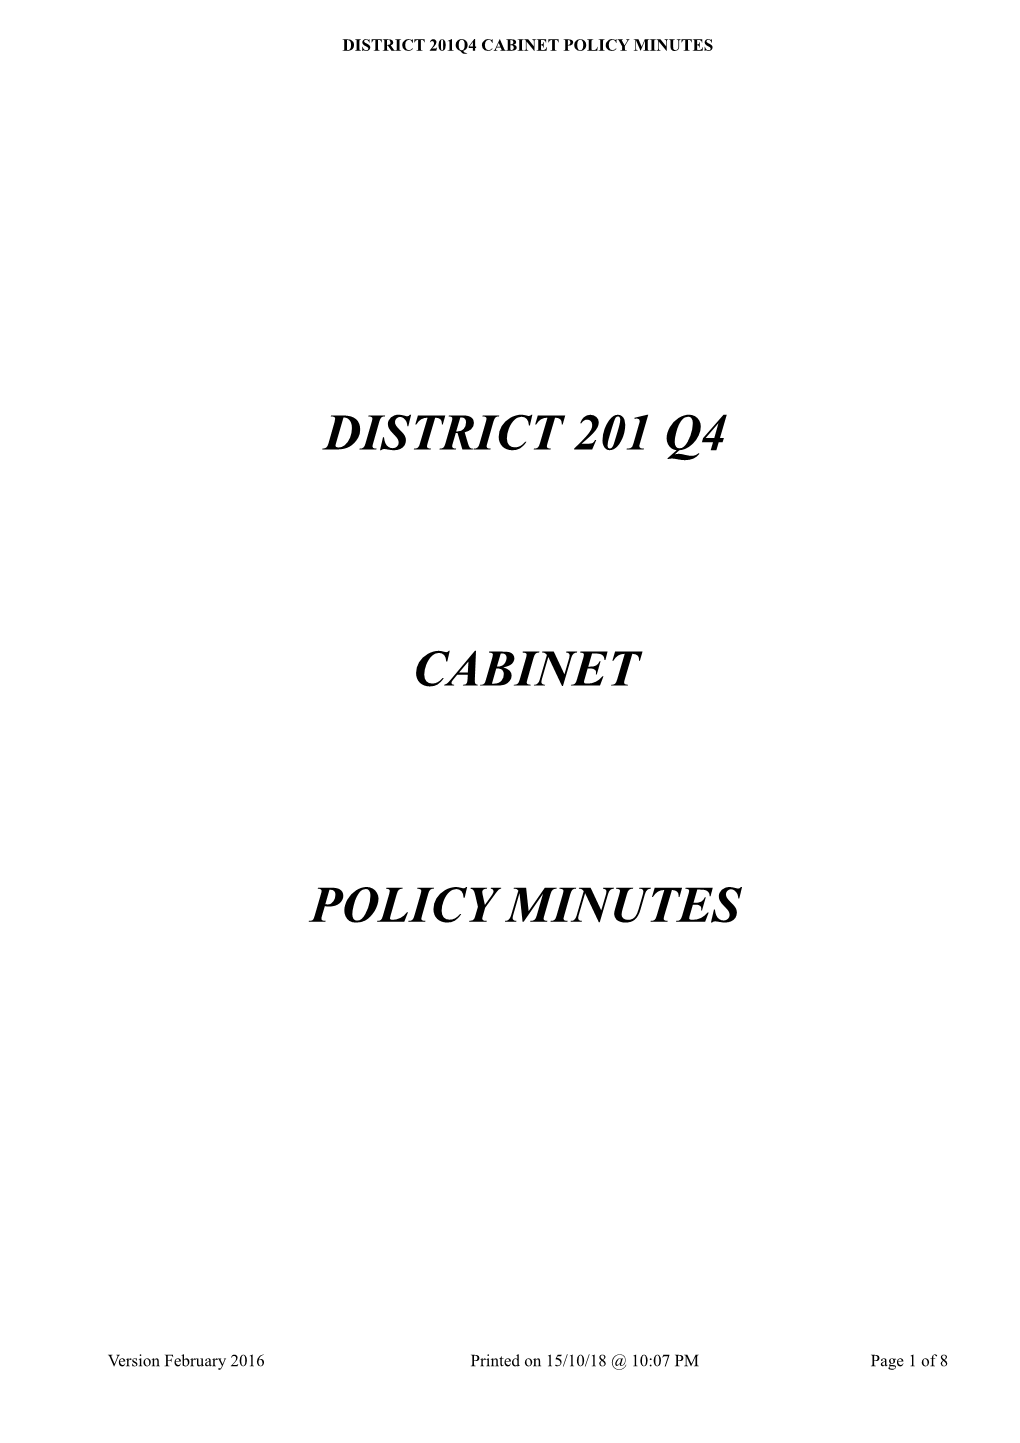 District 201Q4 Cabinet Policy Minutes